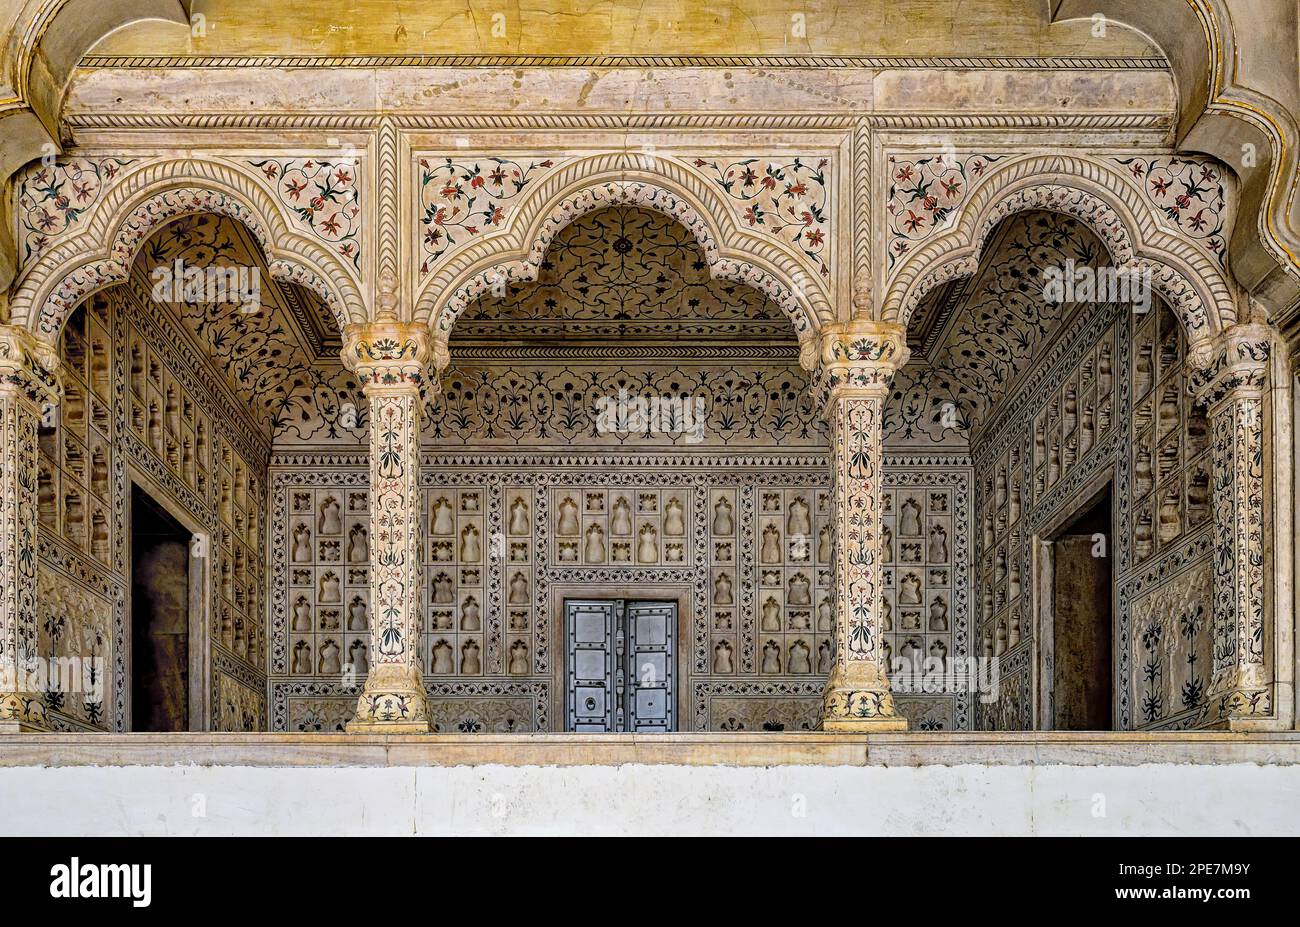 This chamber, the ’jharokha’, where the Emperor sat on his throne, had a triple arched opening, made from marble inlaid with precious stones. Stock Photo